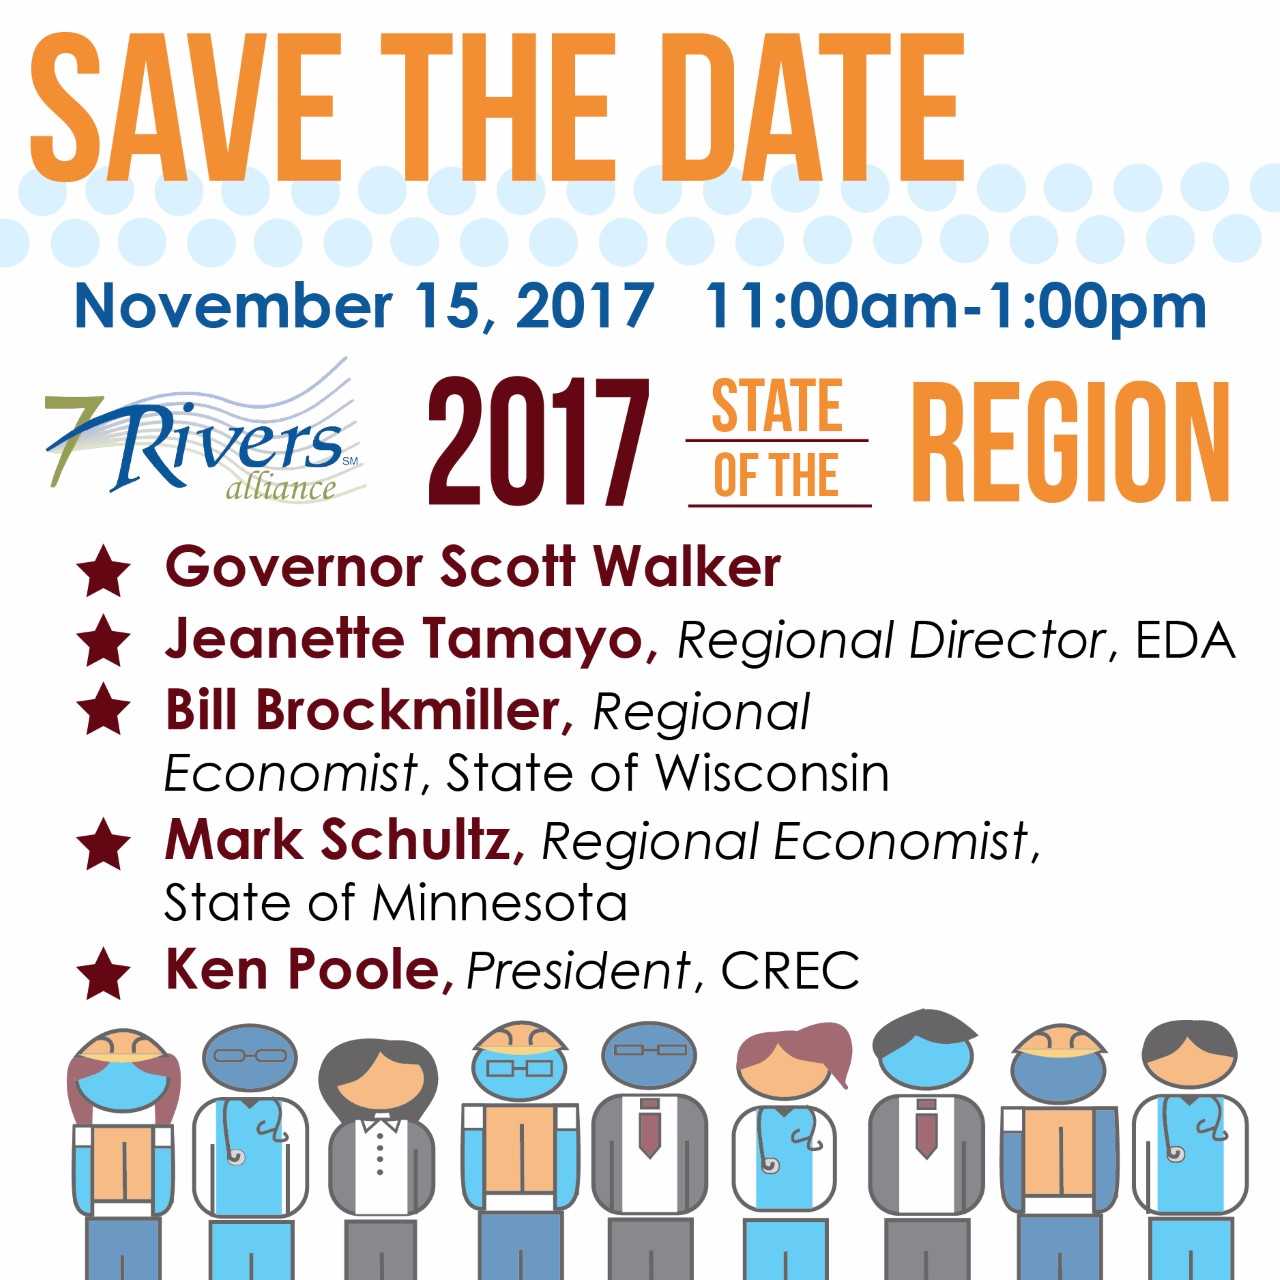 Only 2 Weeks Away from State of the Region!